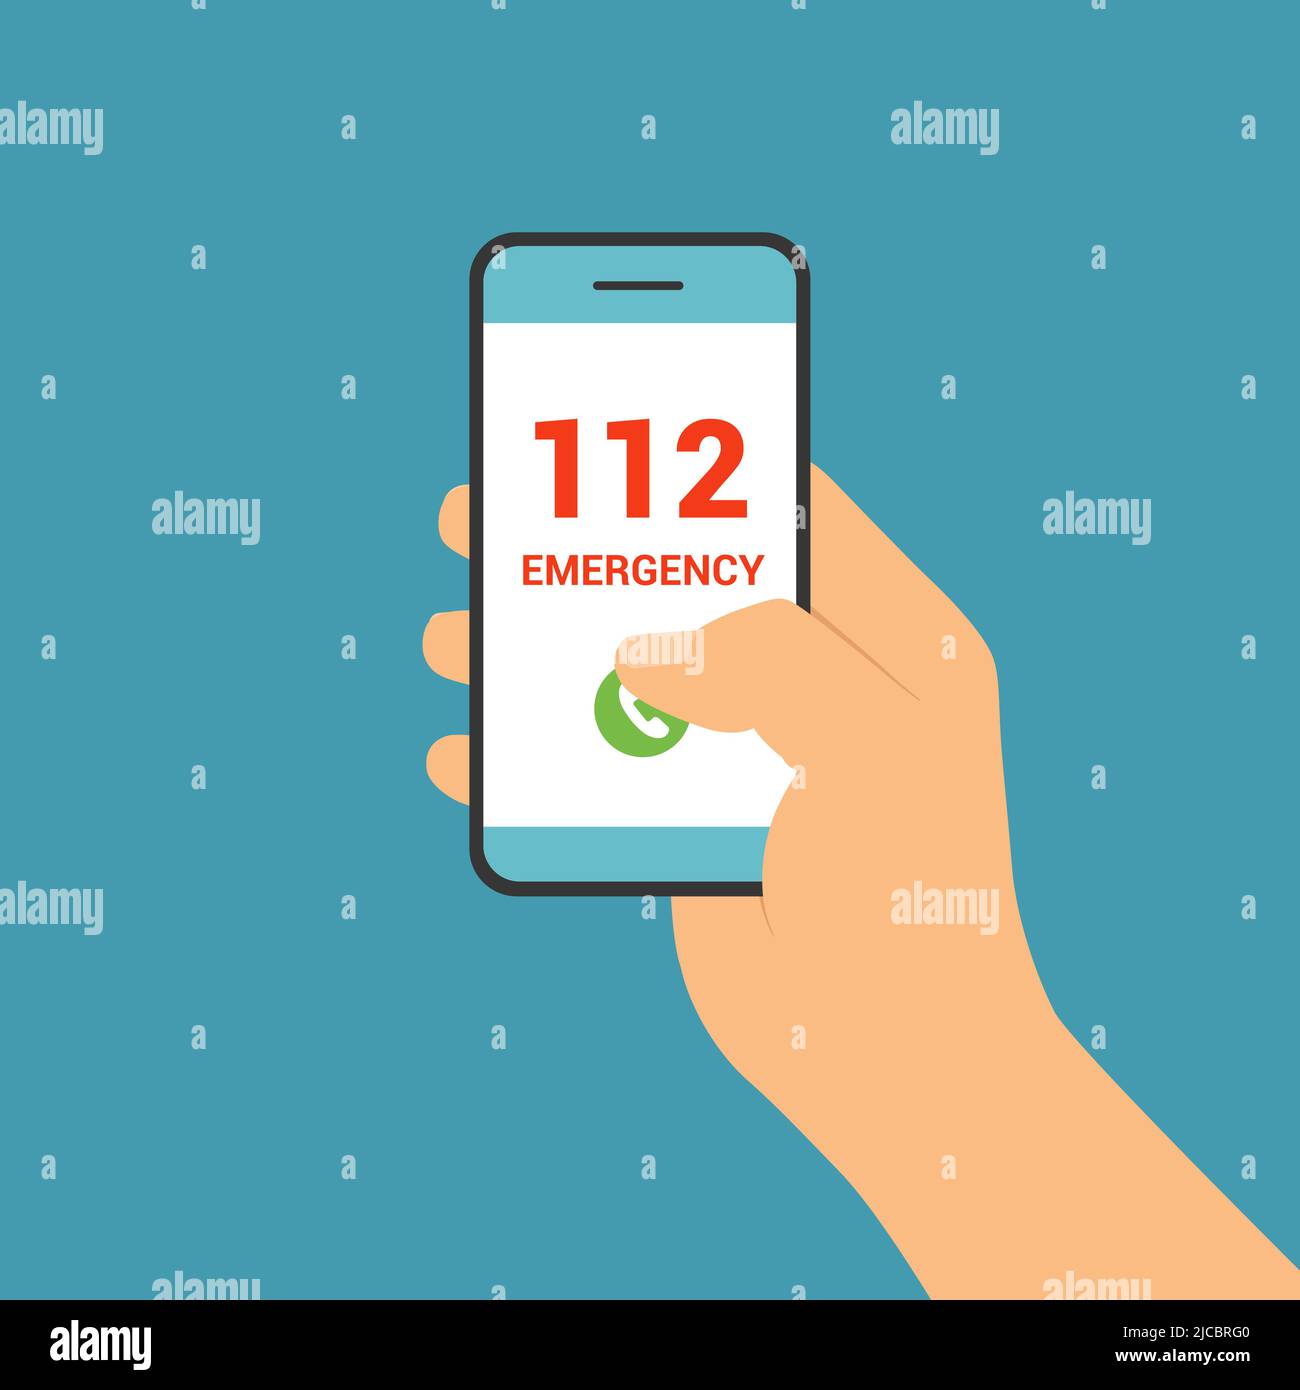 Flat design illustration of male hand holding touch screen mobile phone. Push button call number 112 emergency - vector Stock Vector